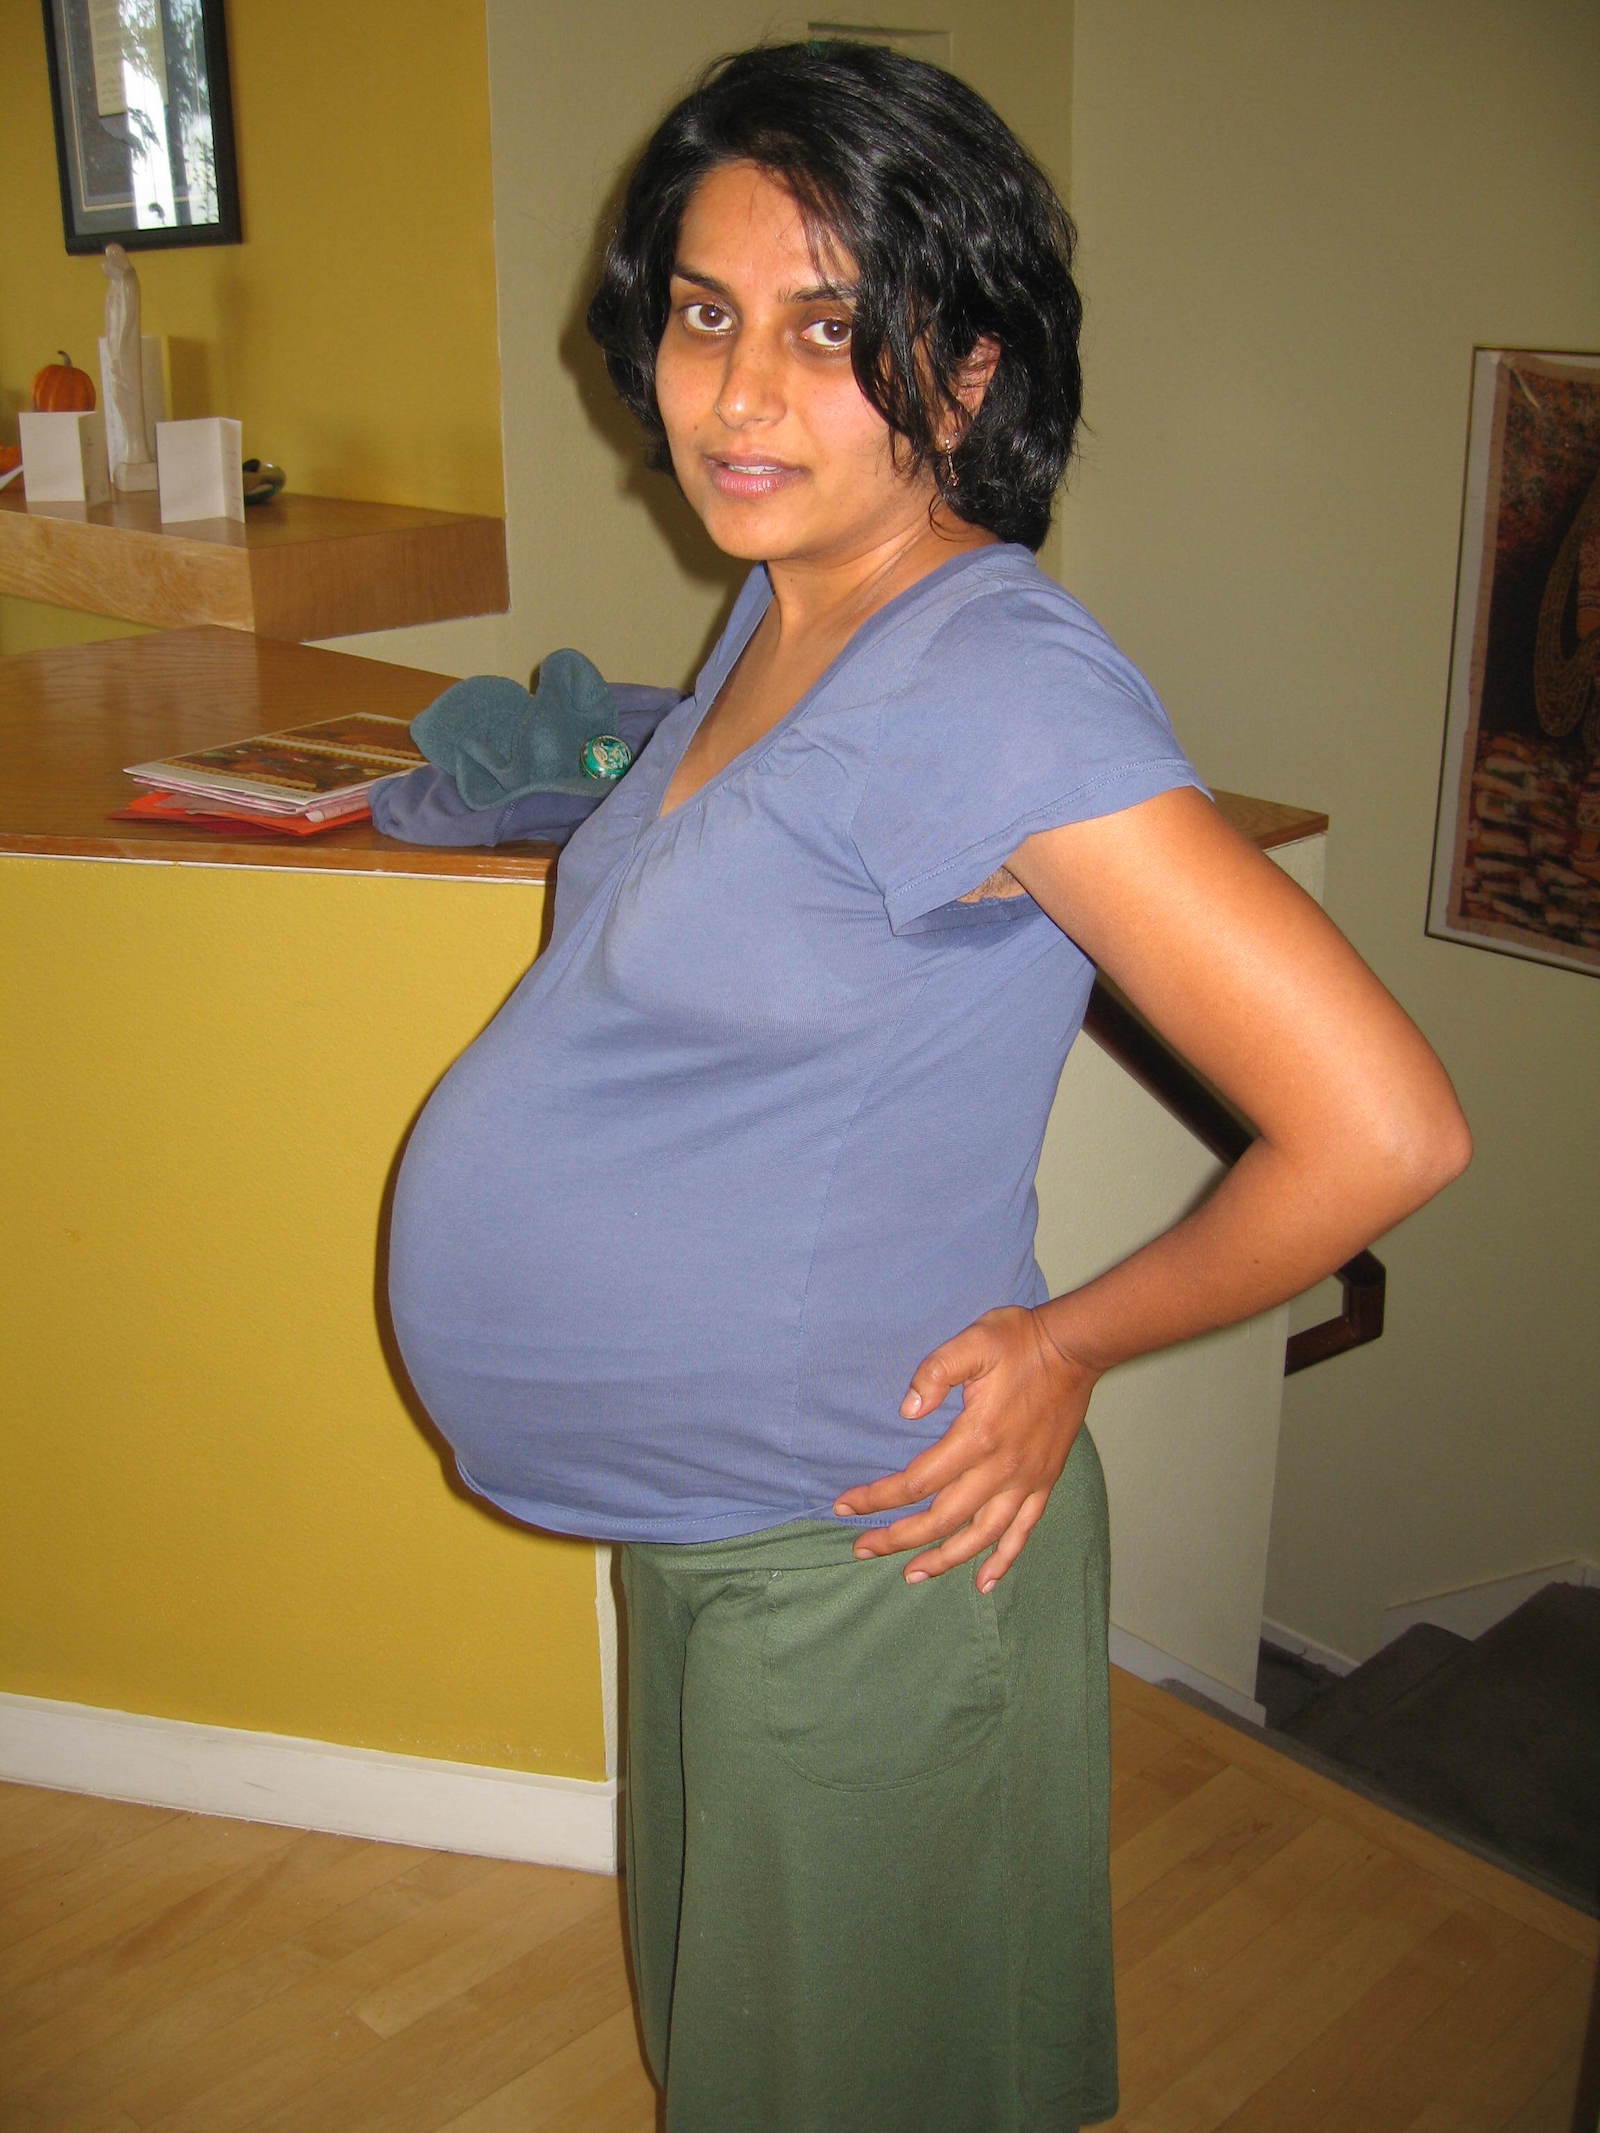 A woman in a blue-t-shirt and with a large pregnant belly puts her hands on her hips and looks into the camera